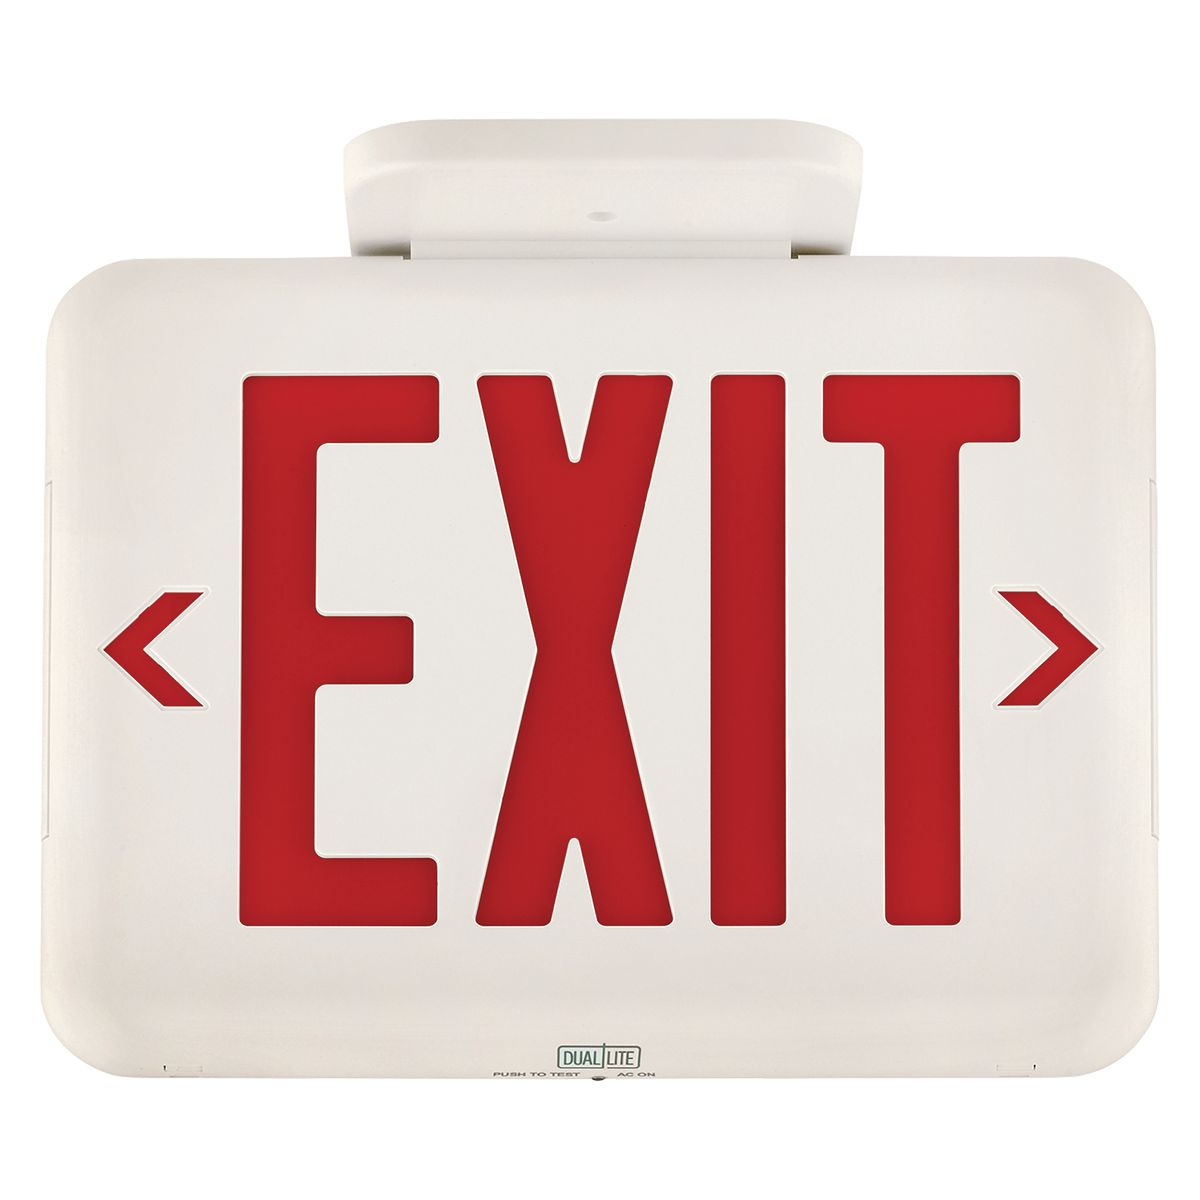 Stand Emer Exit w/ SD red text WH HSG